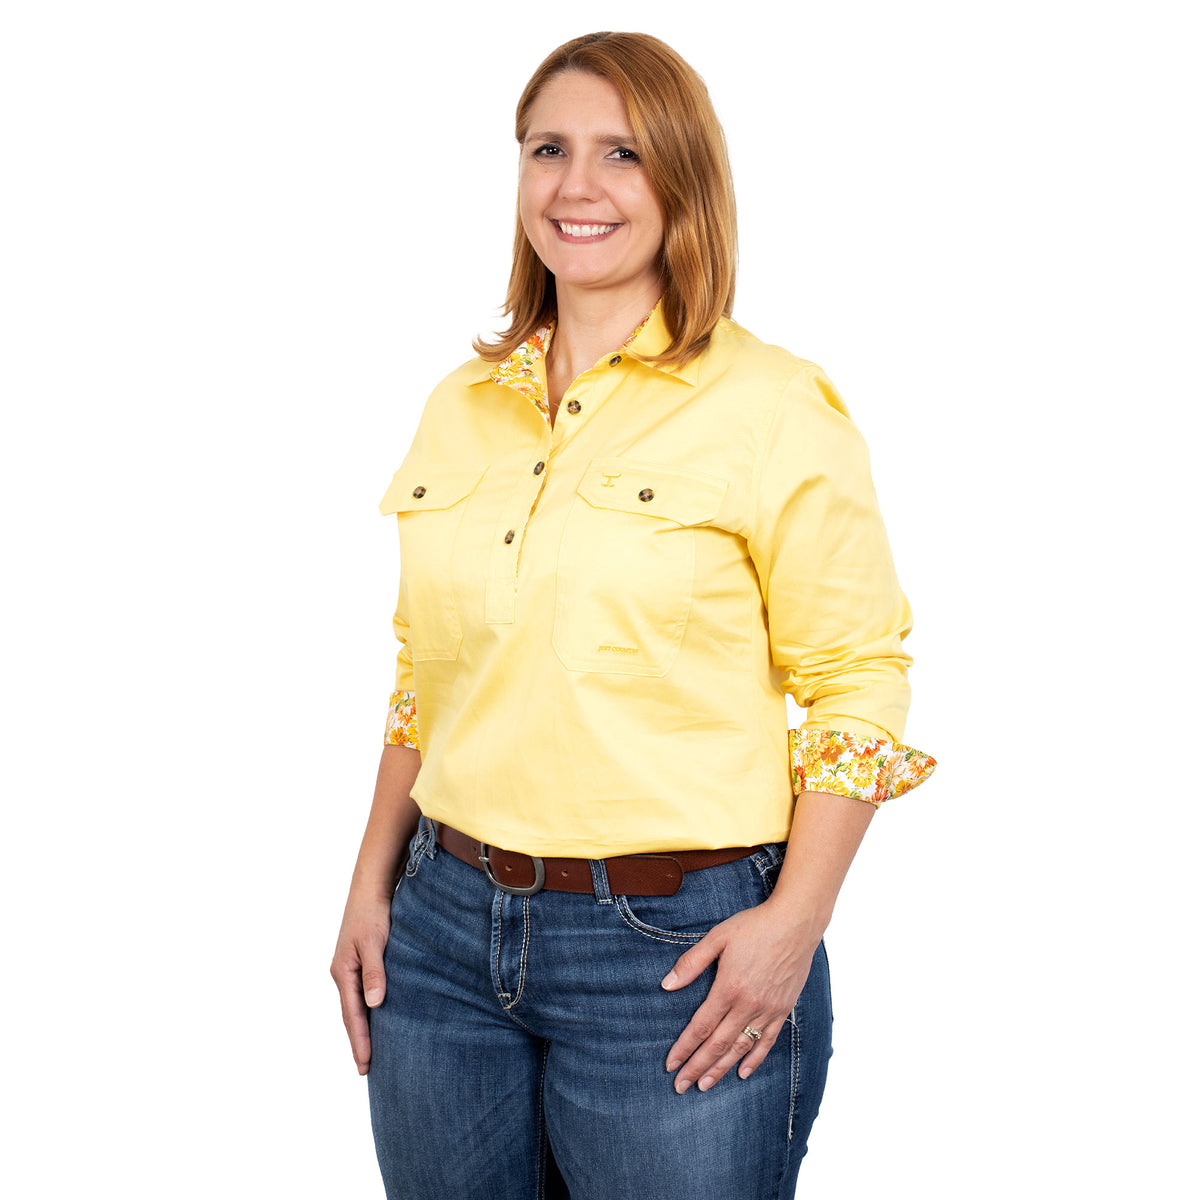 Just Country Womens Jahna Trim Solid Shirt - Butter/White Sunflowers